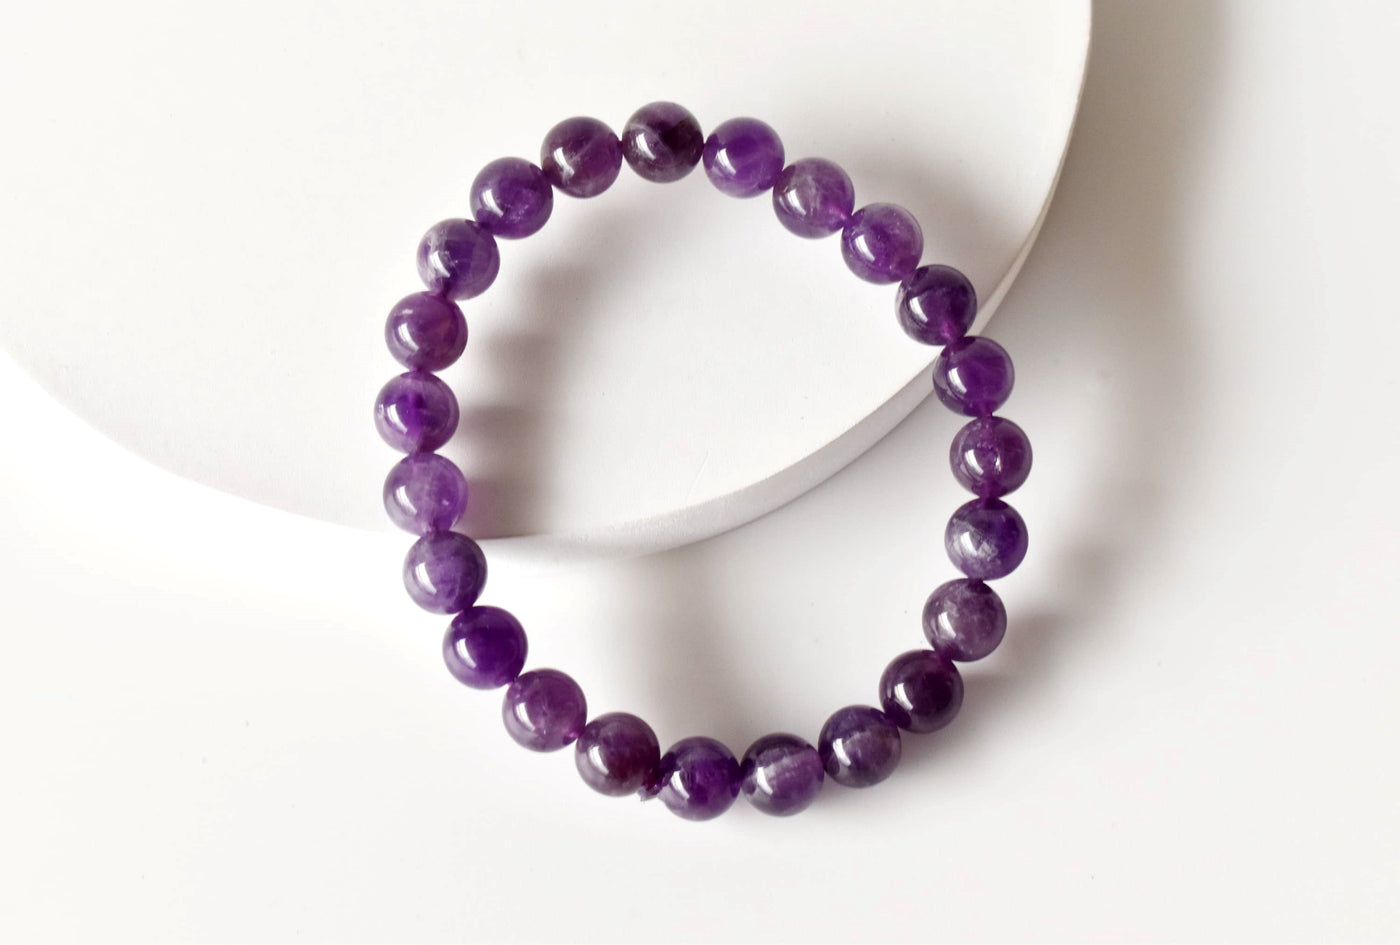 Amethyst Bracelet (Inspiration and Breaking Addictions)